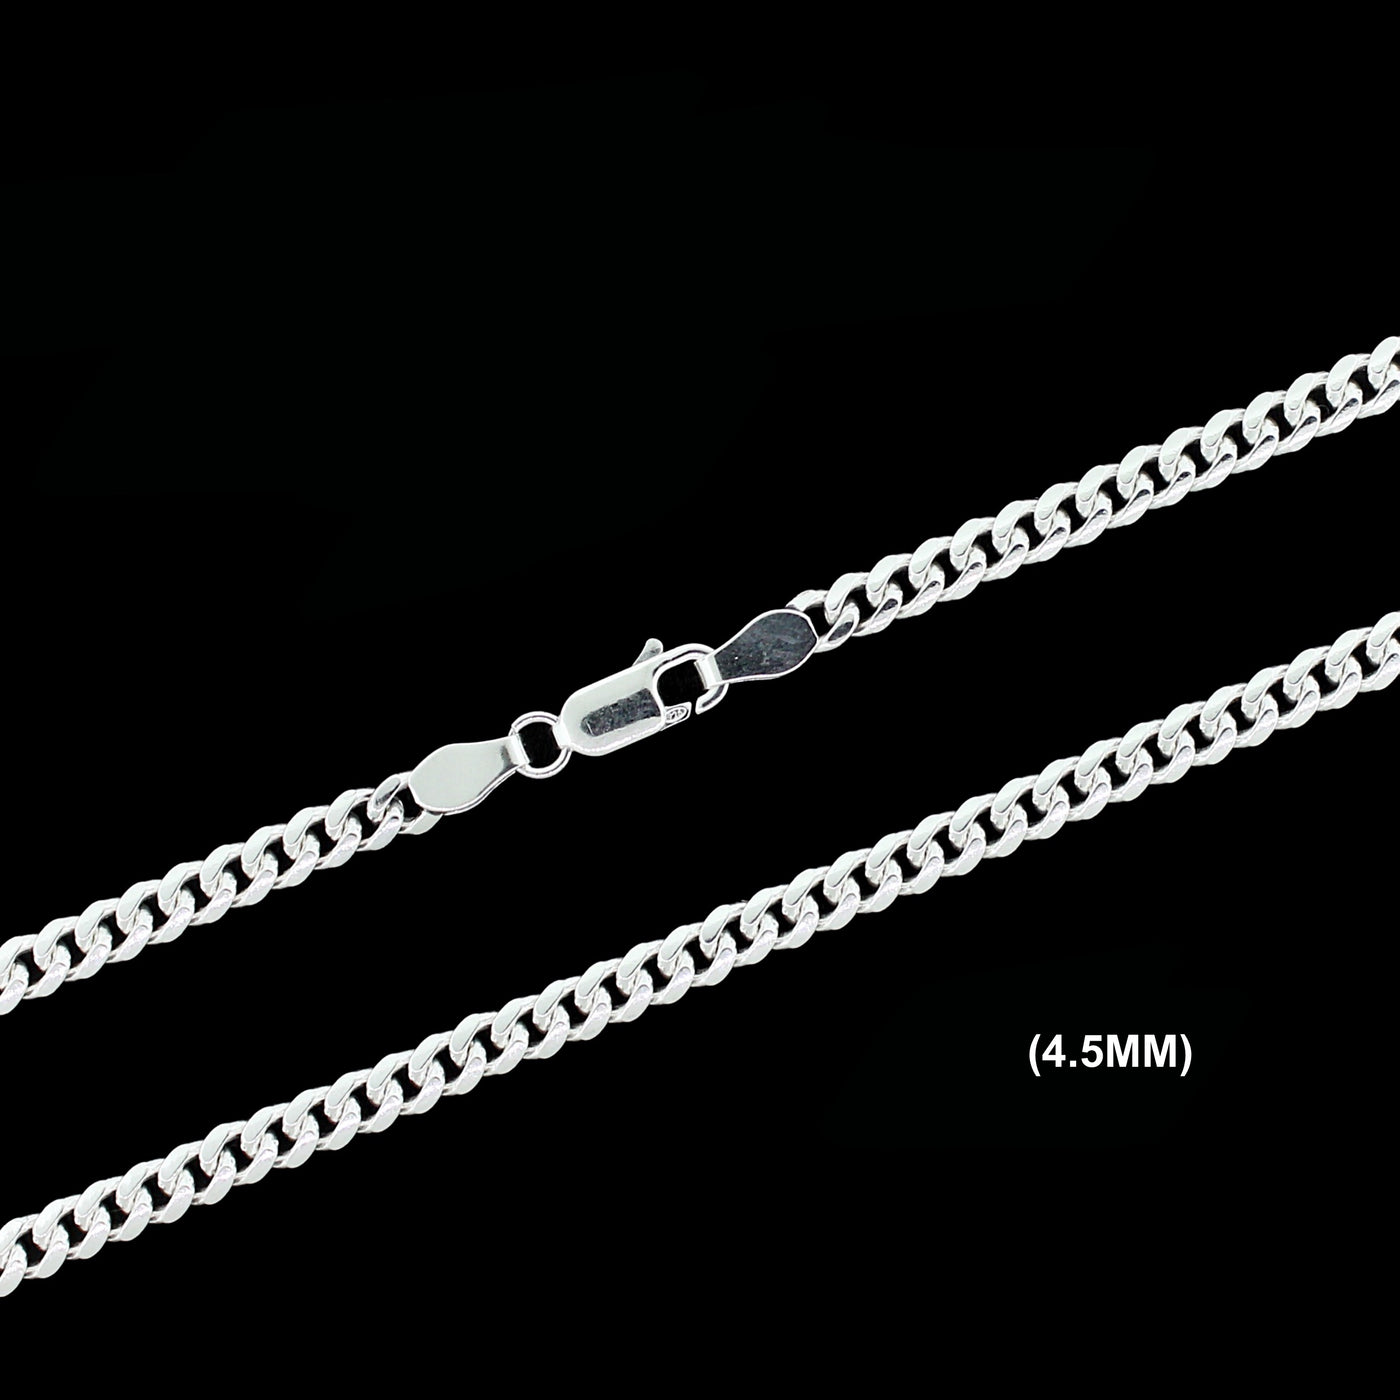 4.5MM Solid 925 Sterling Silver Miami Cuban Link Chain Necklace or Bracelet ITALY